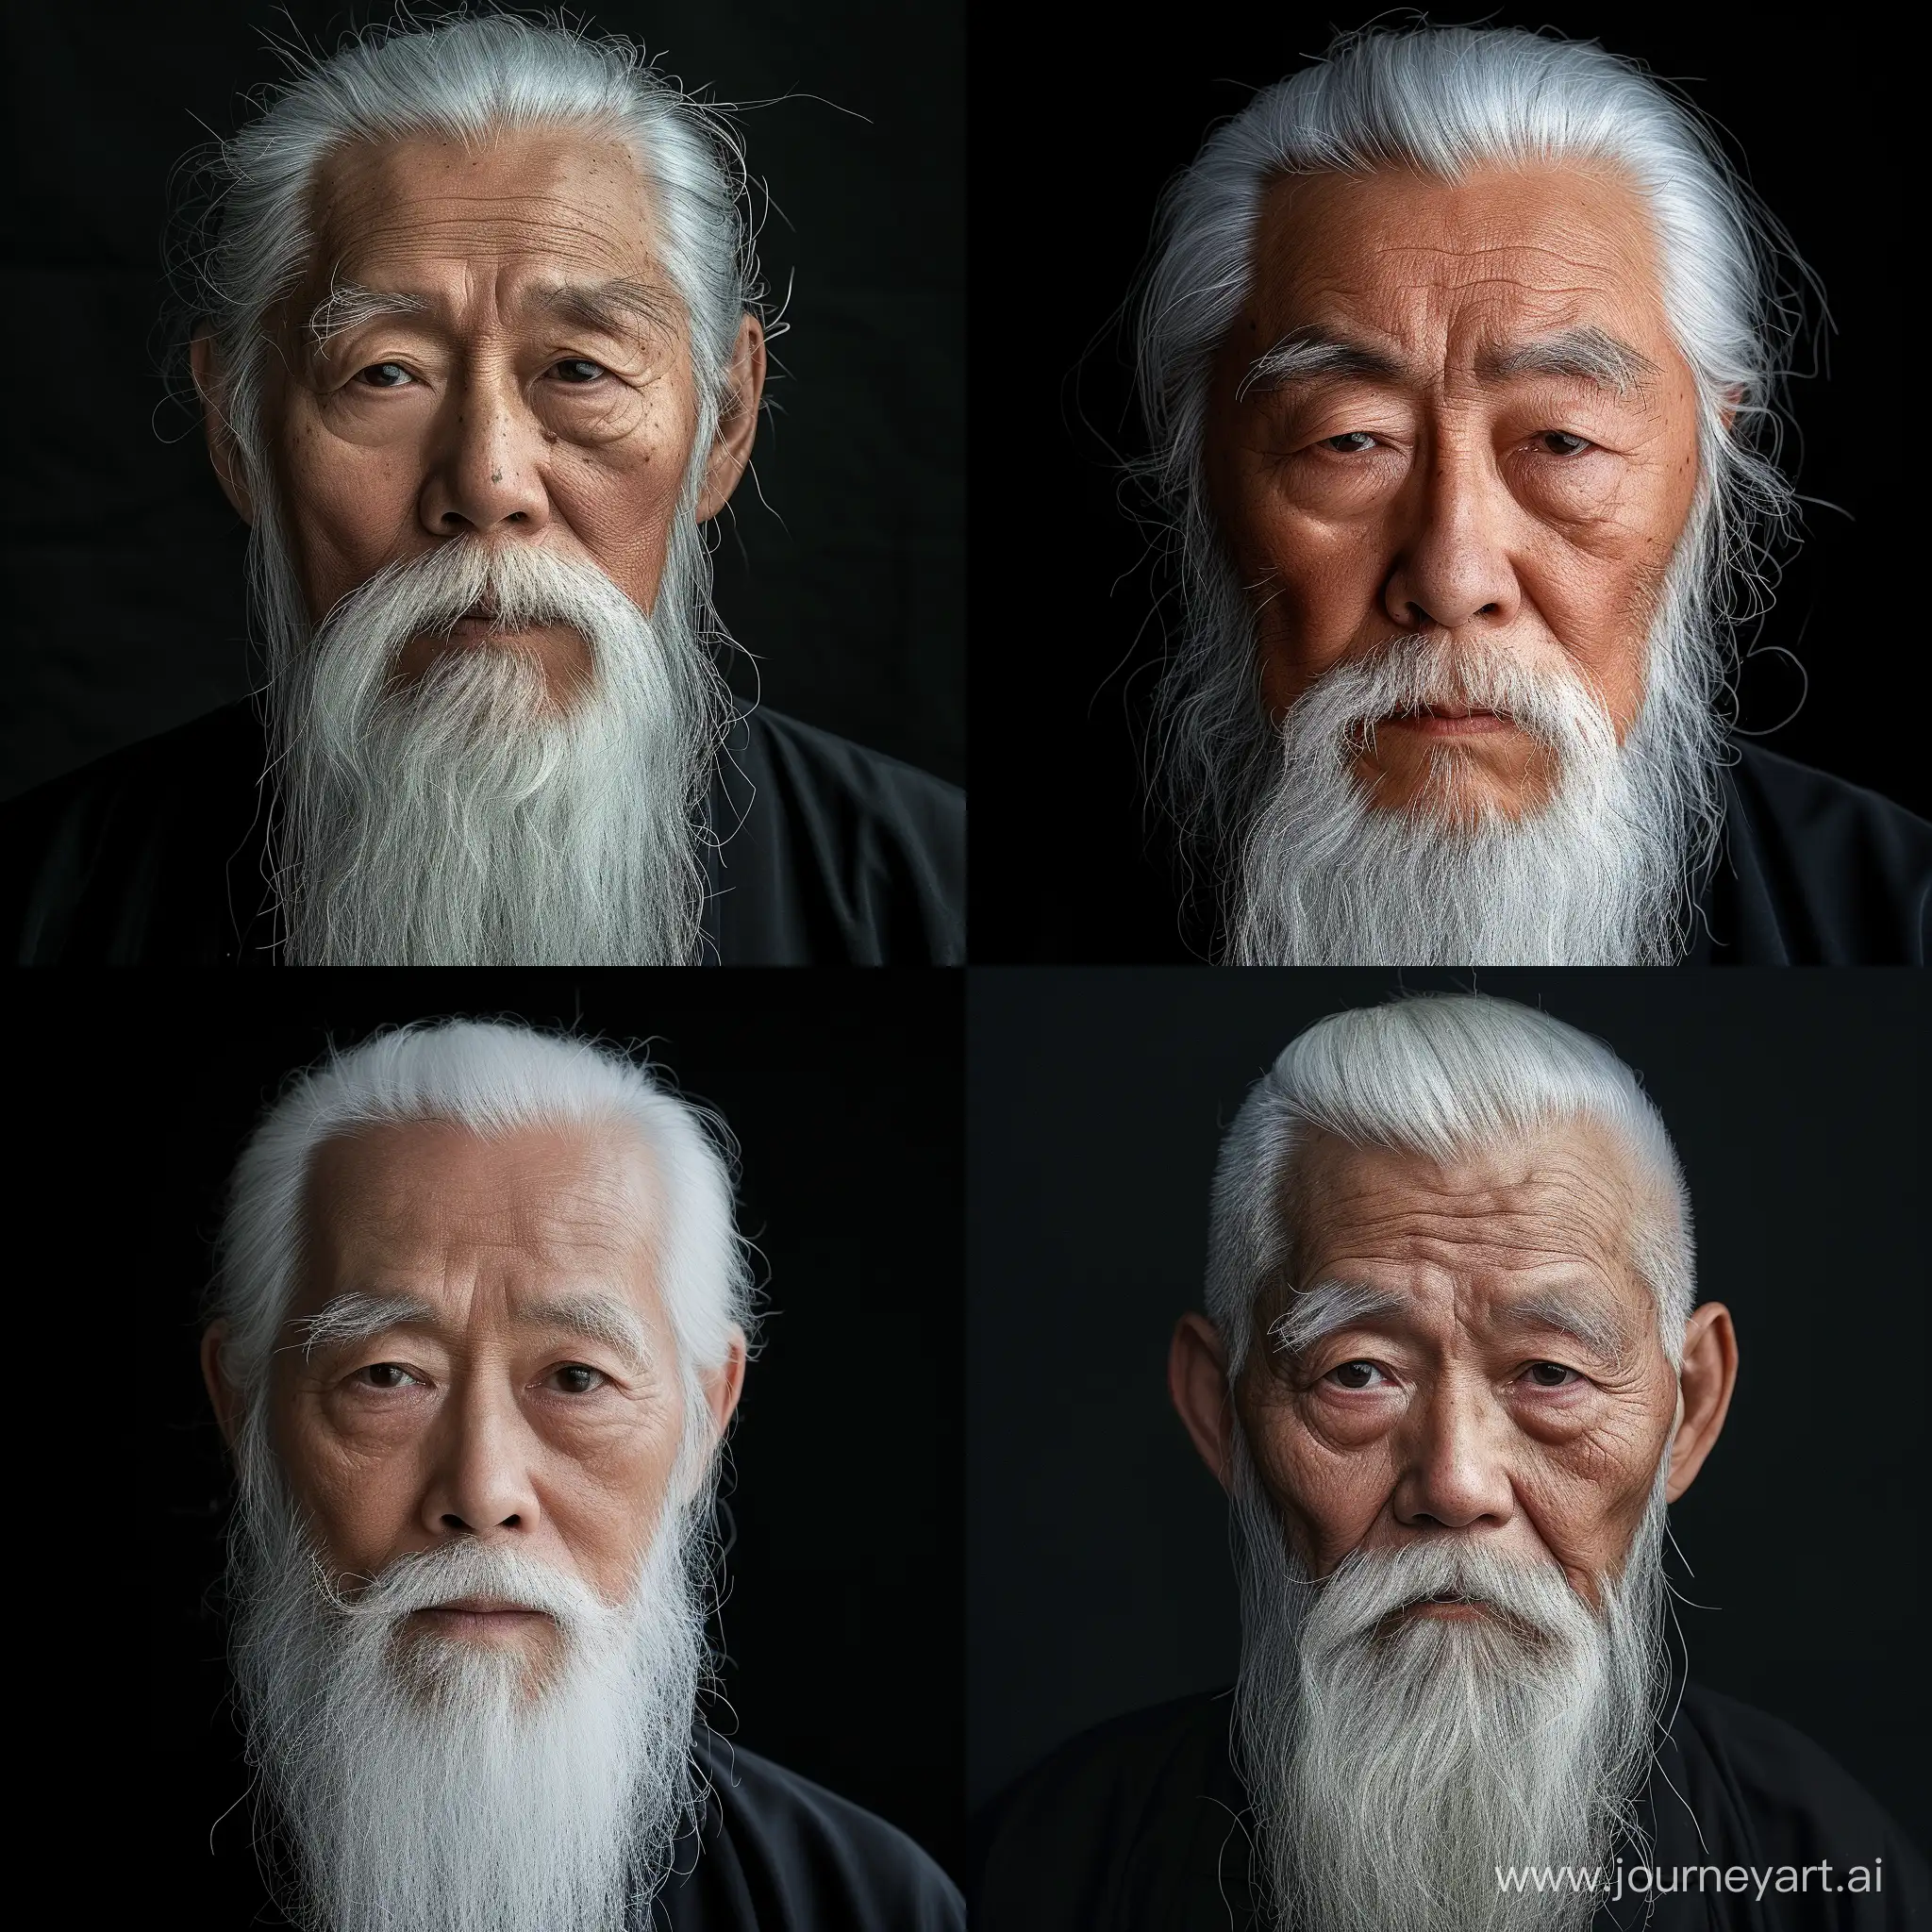 Wisdom-Captured-Portrait-of-a-70YearOld-Chinese-Philosopher-with-a-White-Beard